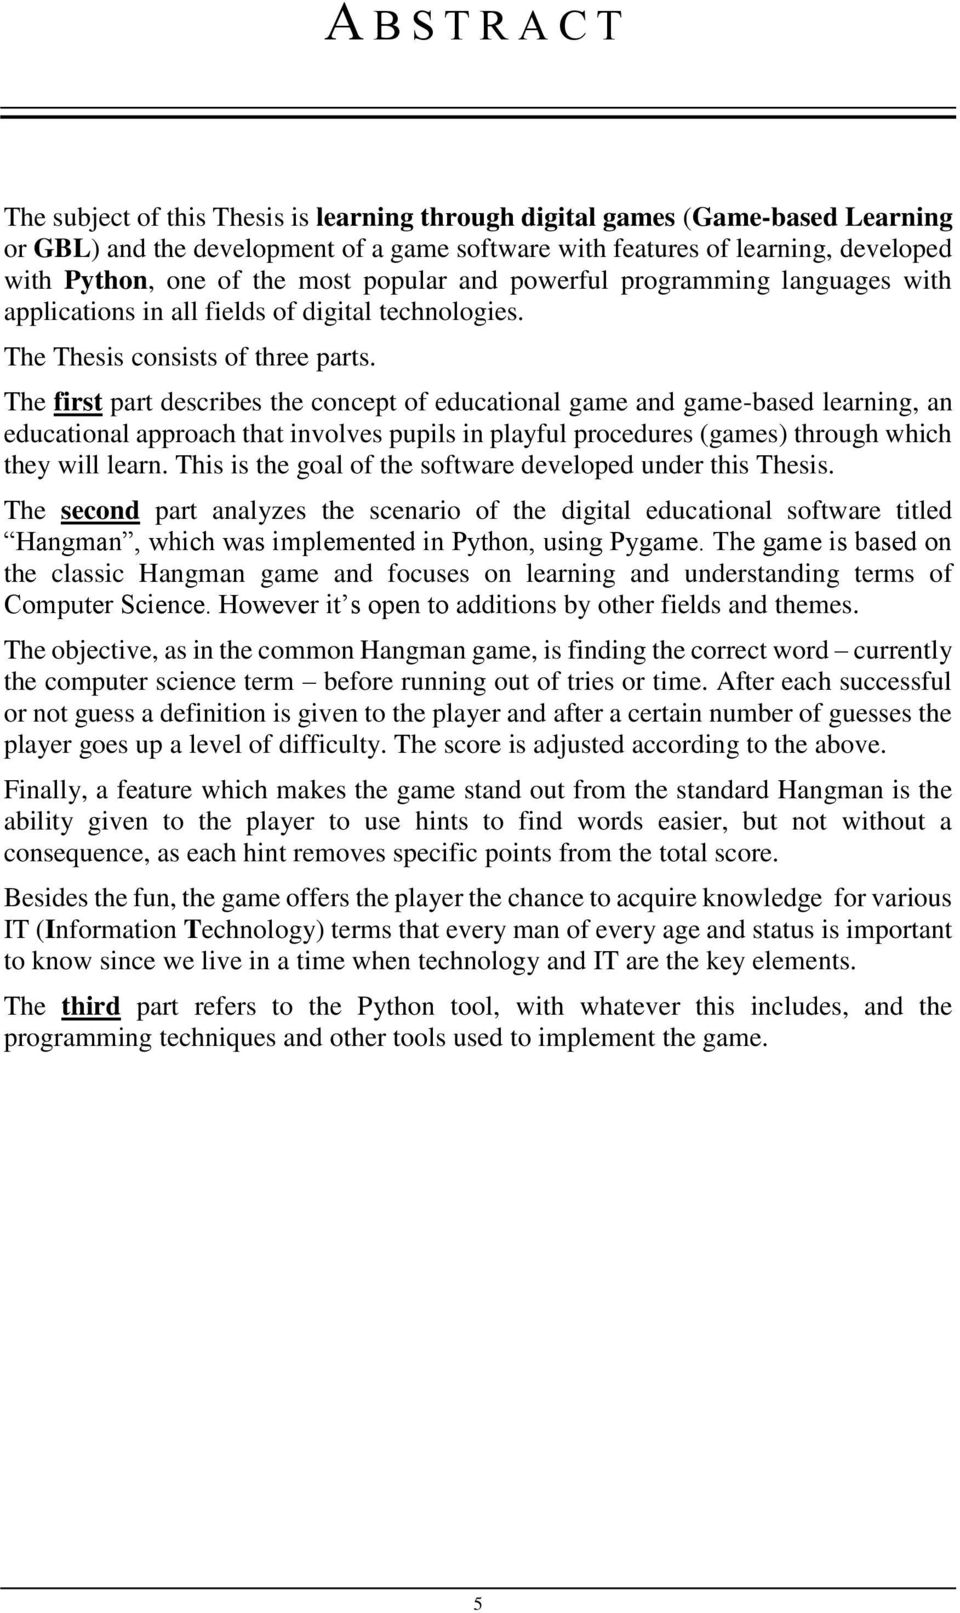 The first part describes the concept of educational game and game-based learning, an educational approach that involves pupils in playful procedures (games) through which they will learn.